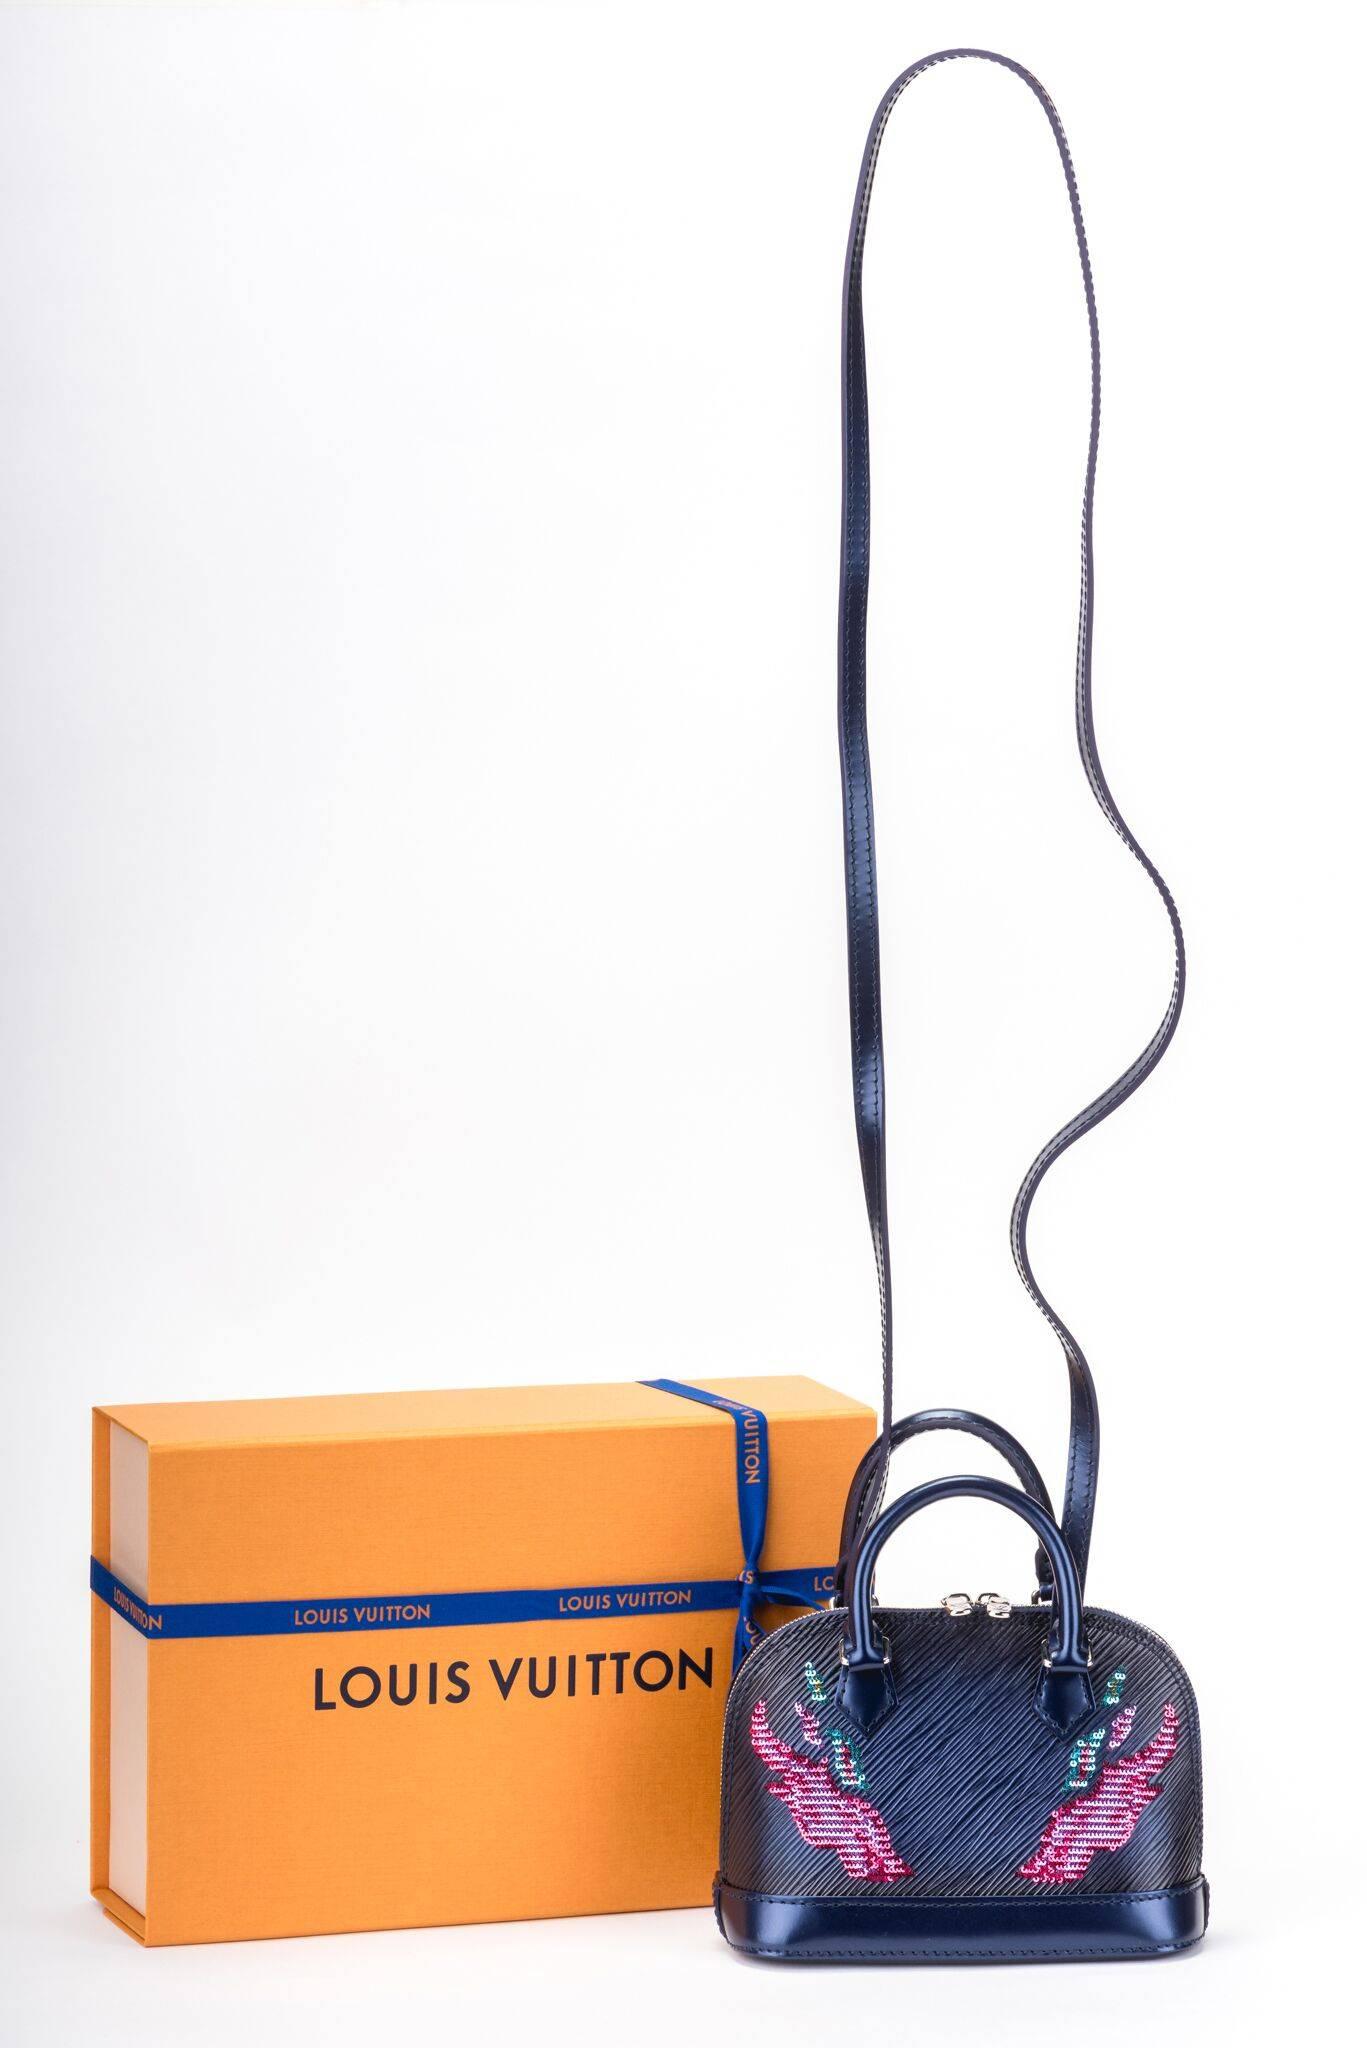 Louis Vuitton limited edition nano alma in epi leather with sequins flames design. Detachable strap.Brand new in box, comes with ribbon and shopper.

Bag measures at 6.5